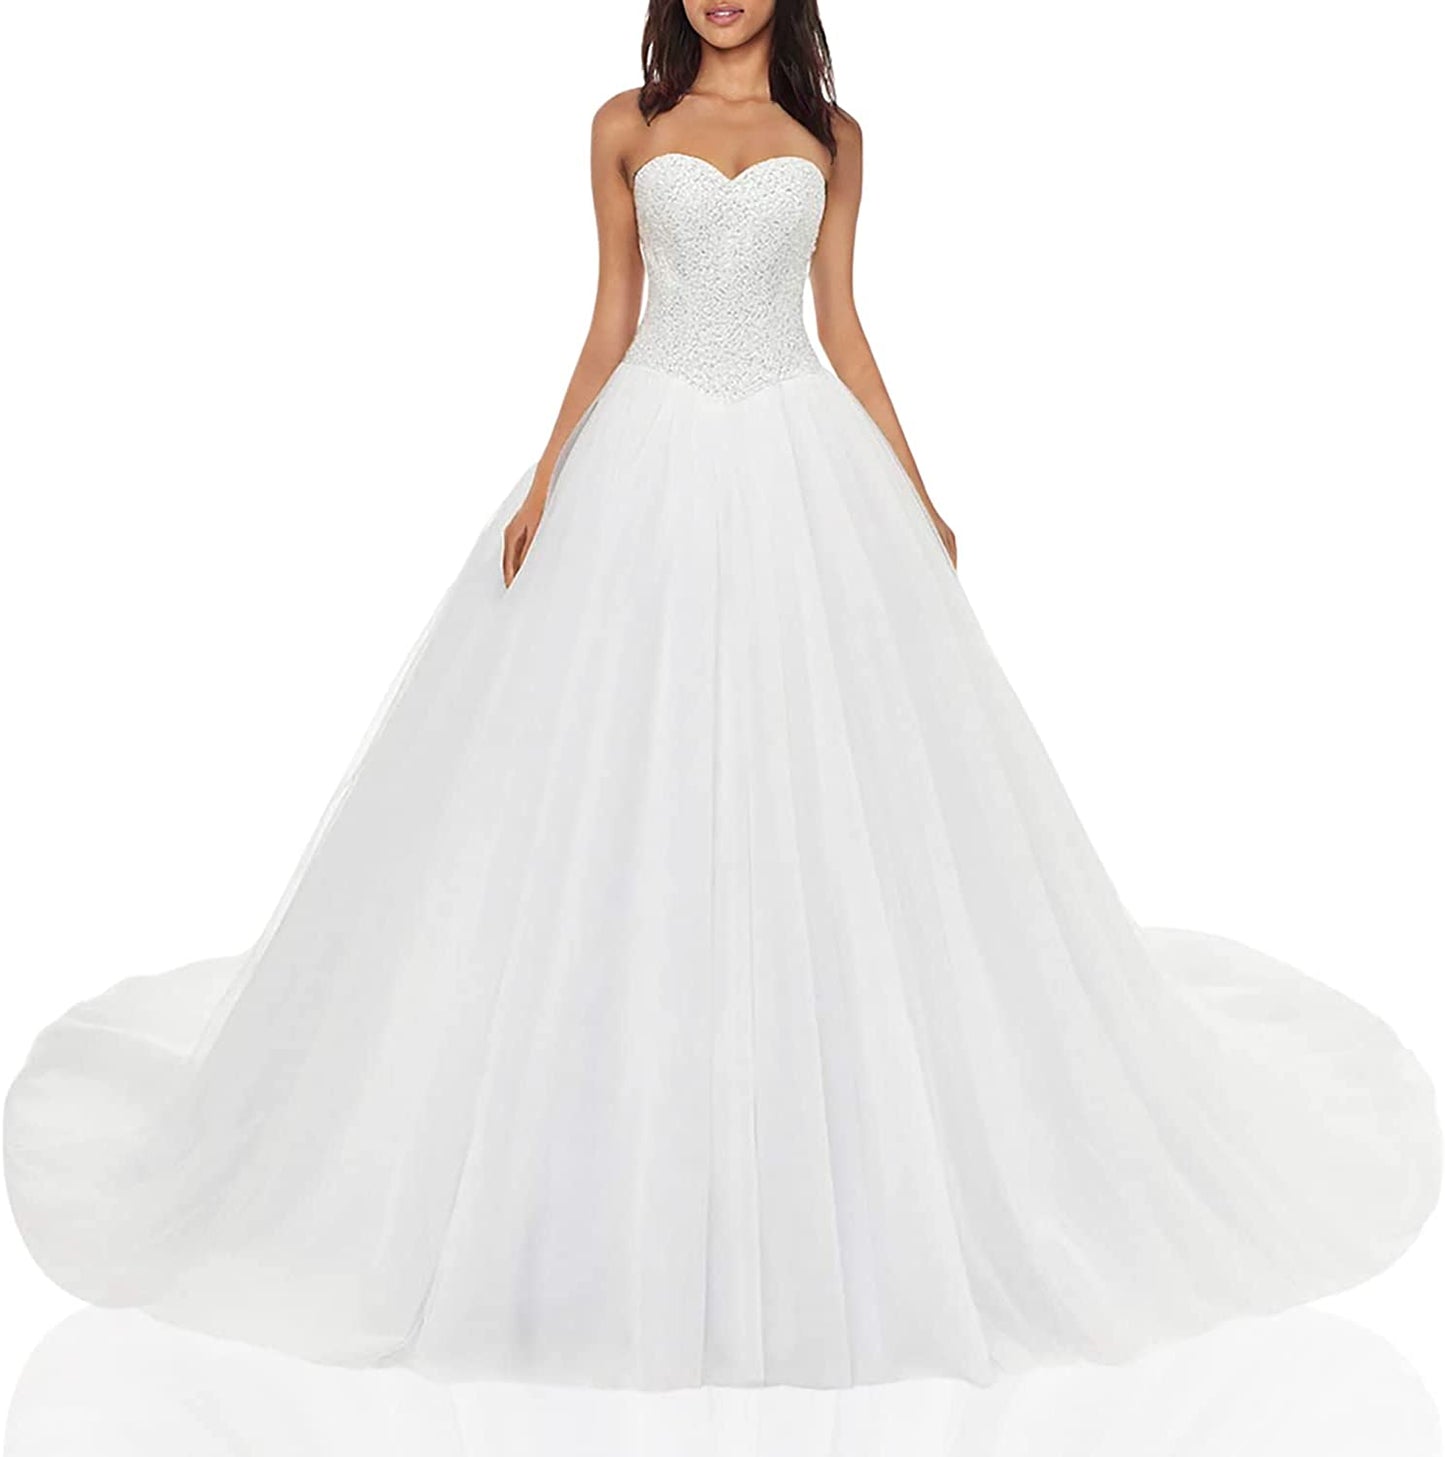 Women's Sweetheart Tulle A-line Wedding Dresses for Bride with Train